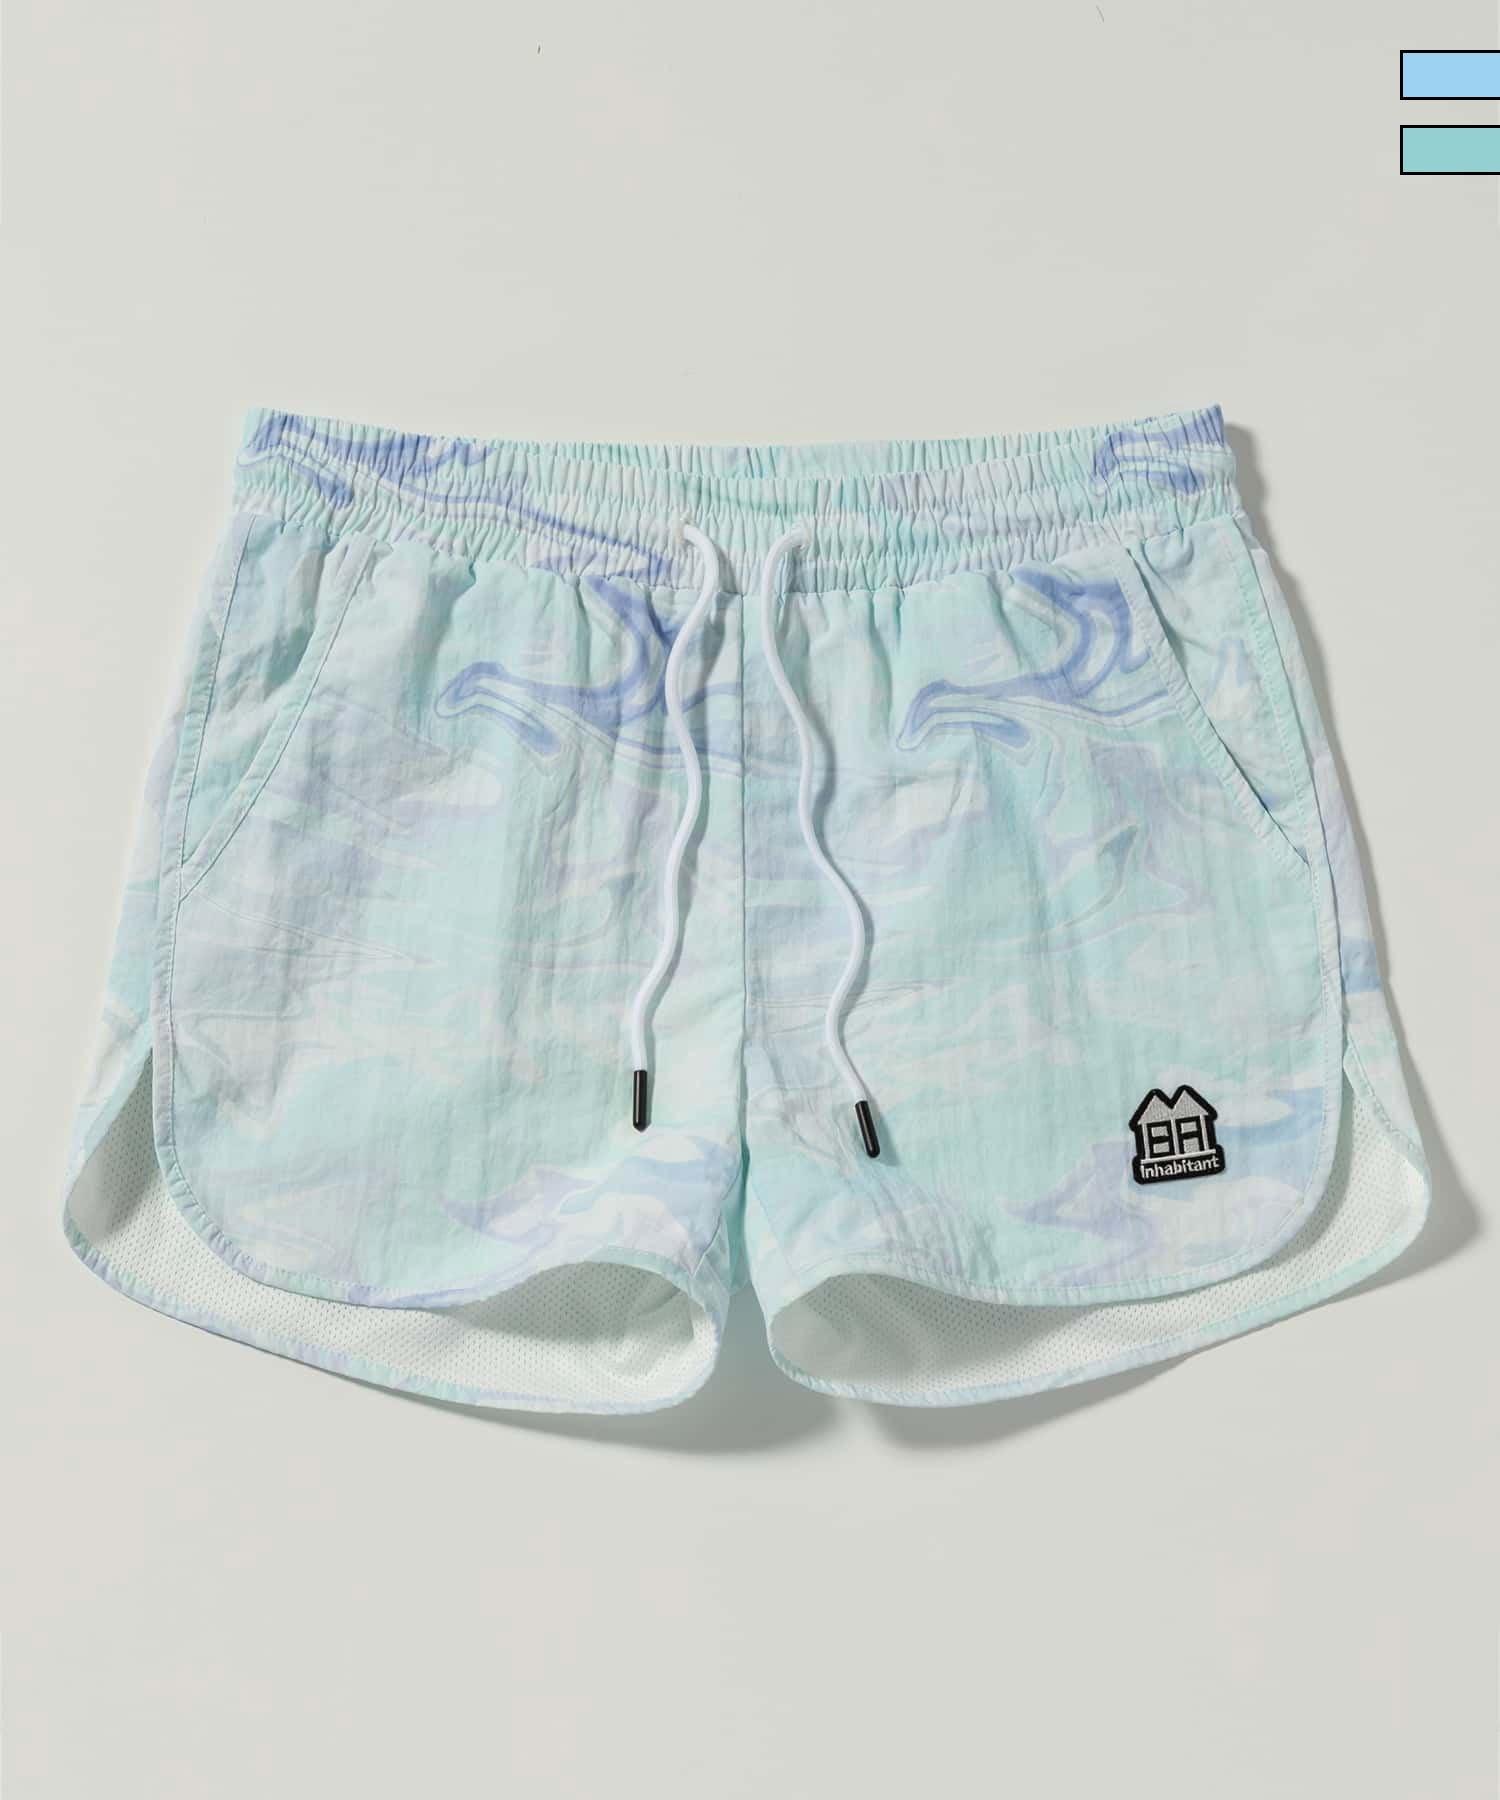 【WOMENS】Boat Womans Dry Shorts